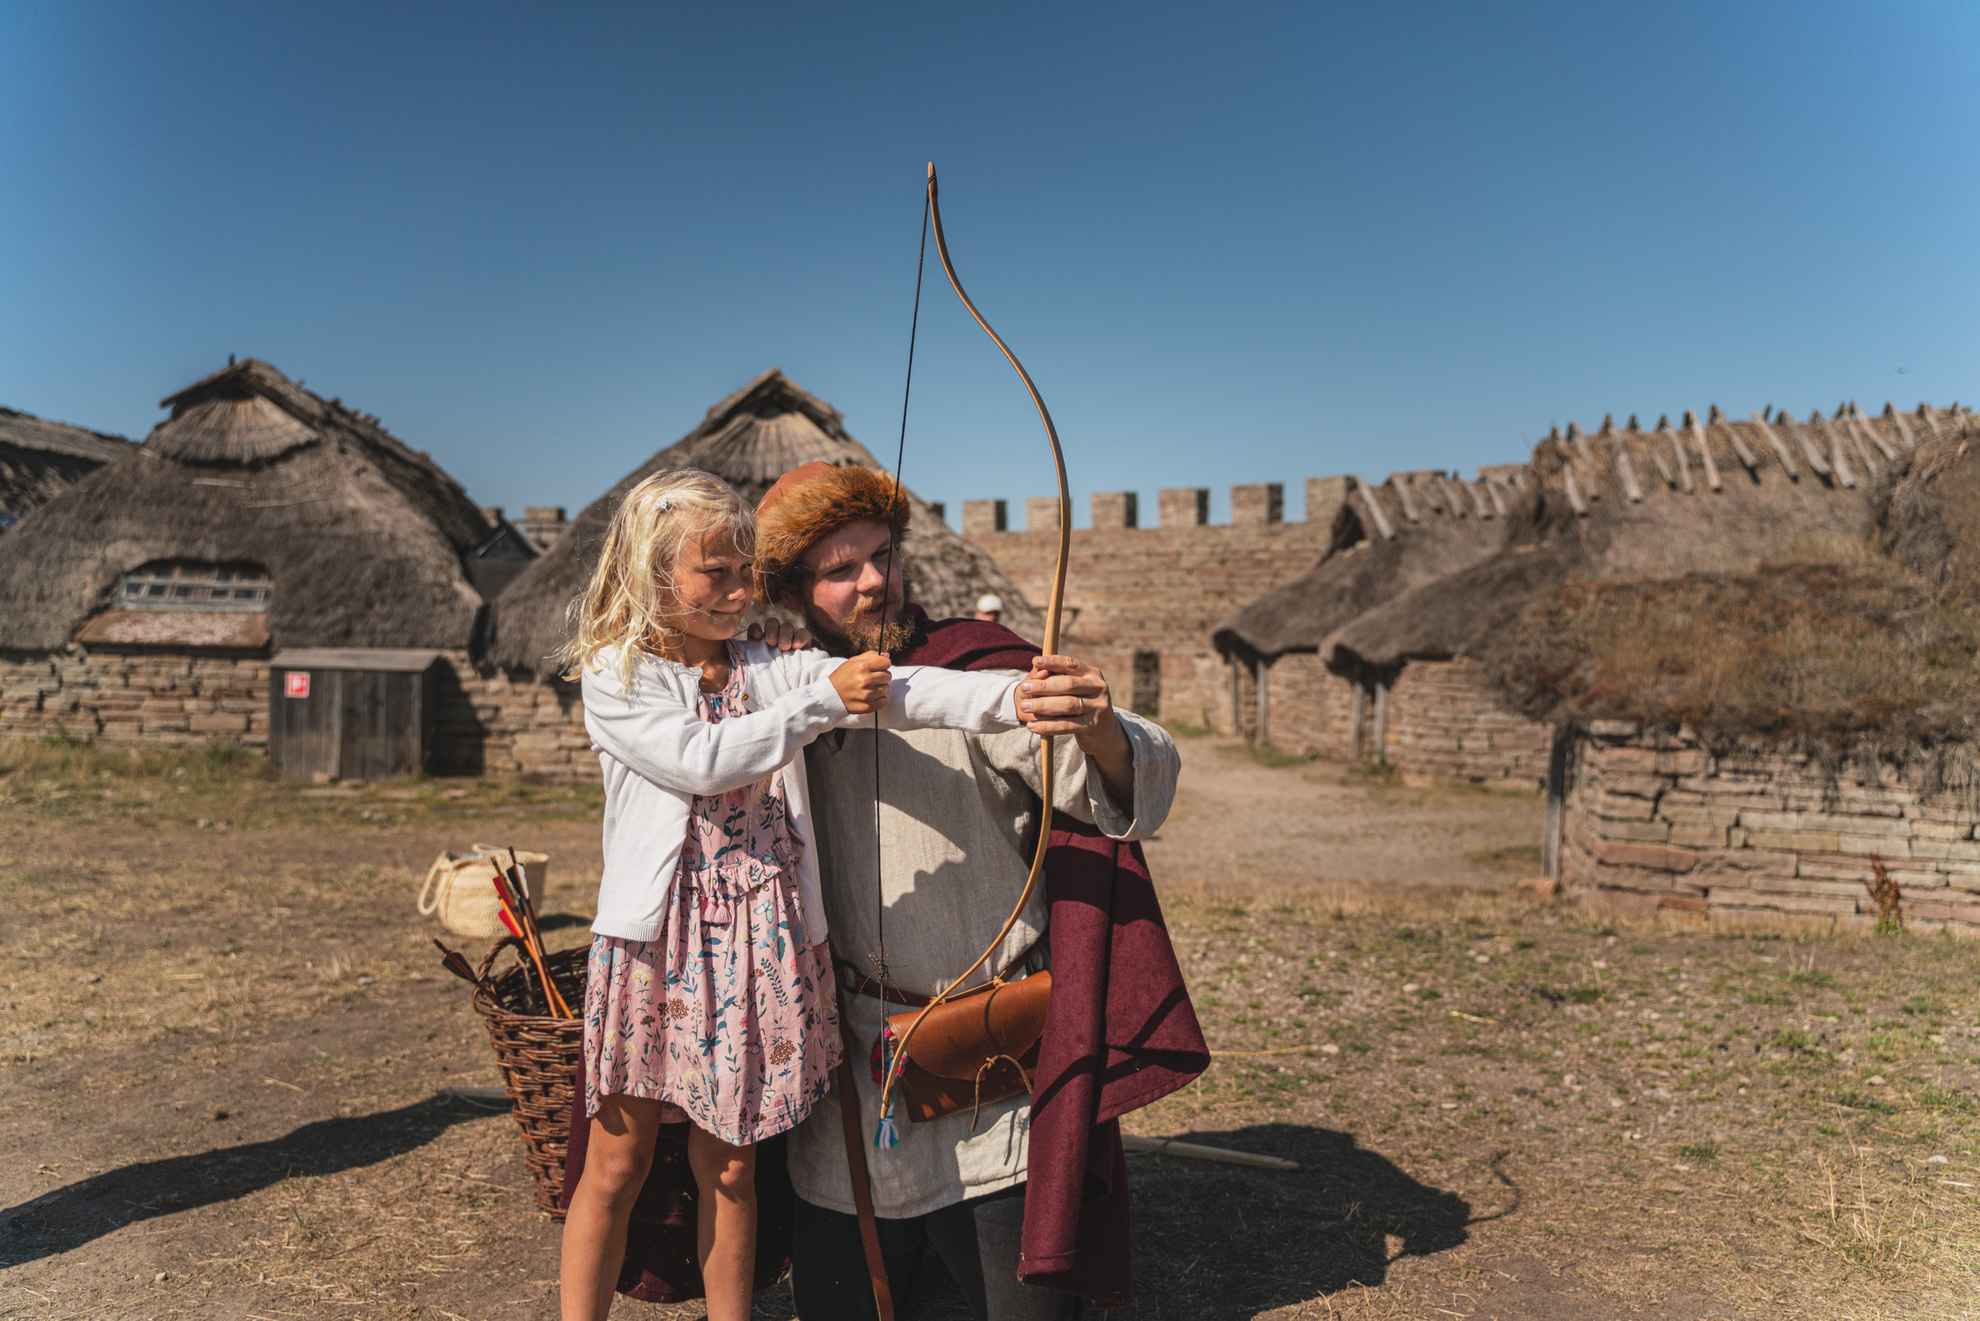 Child tries bow and arrow at Eketorp Fortress with man in period-appropriate clothing.